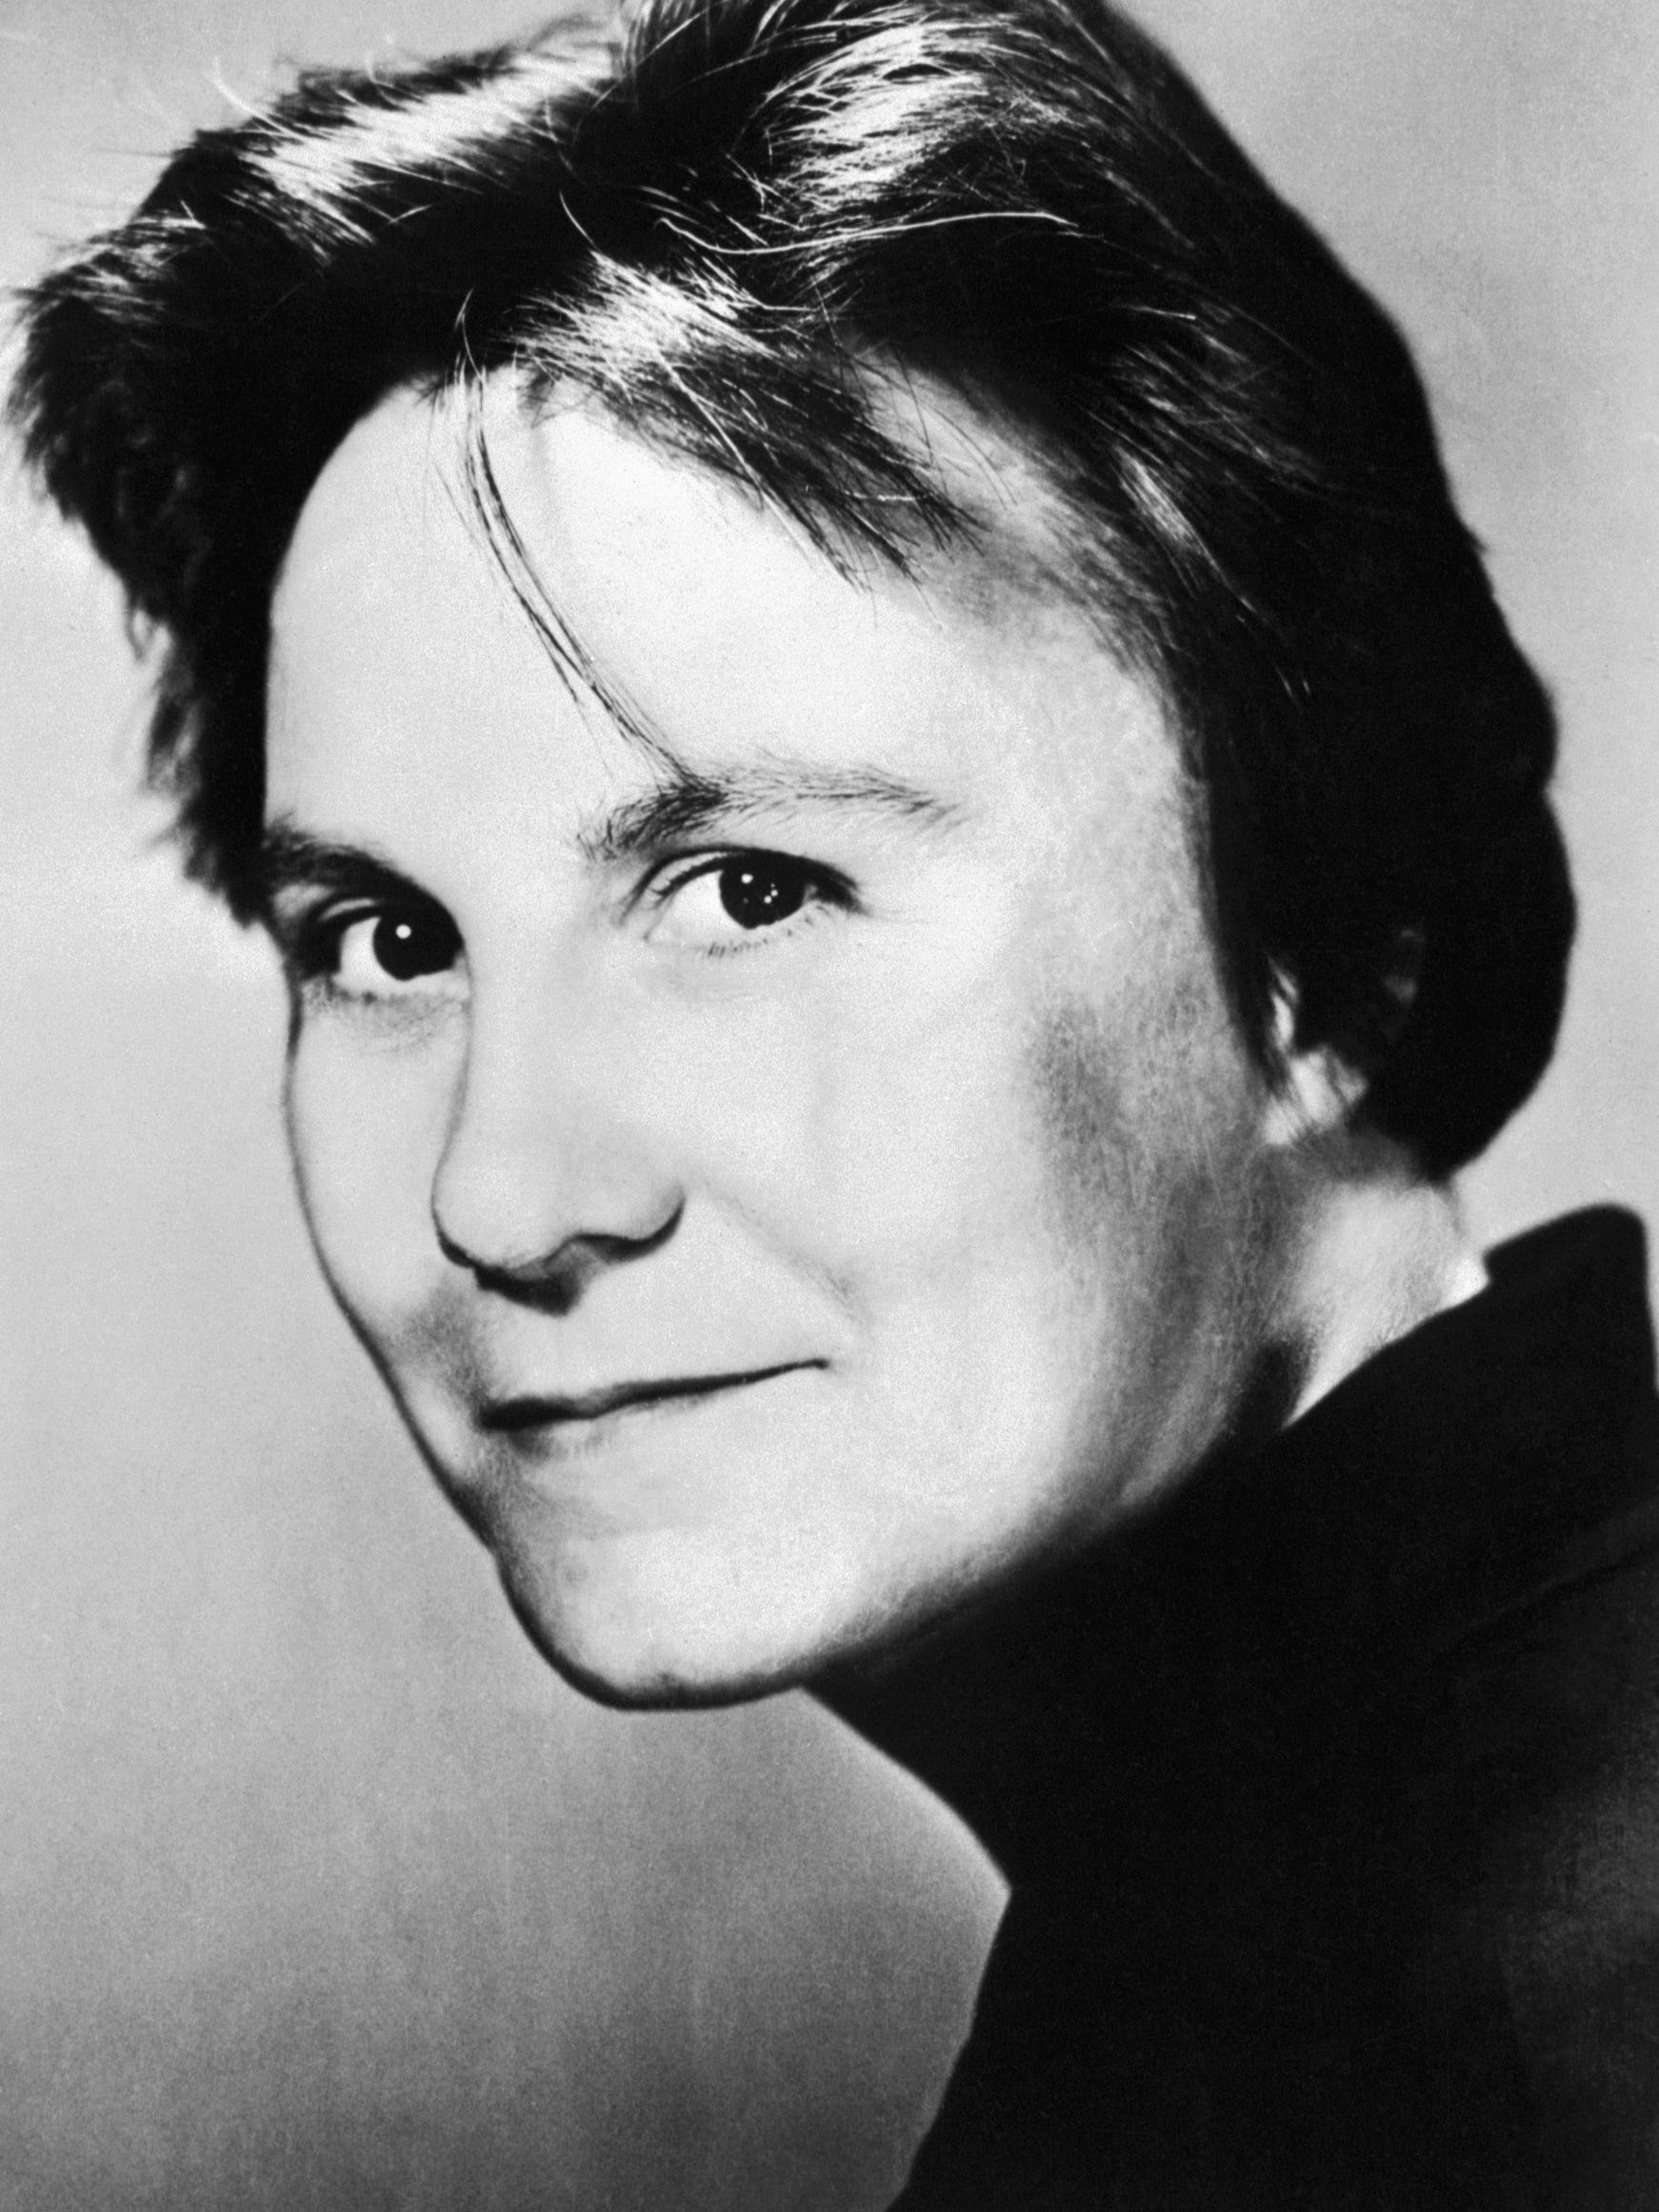 We answer your Harper Lee questions